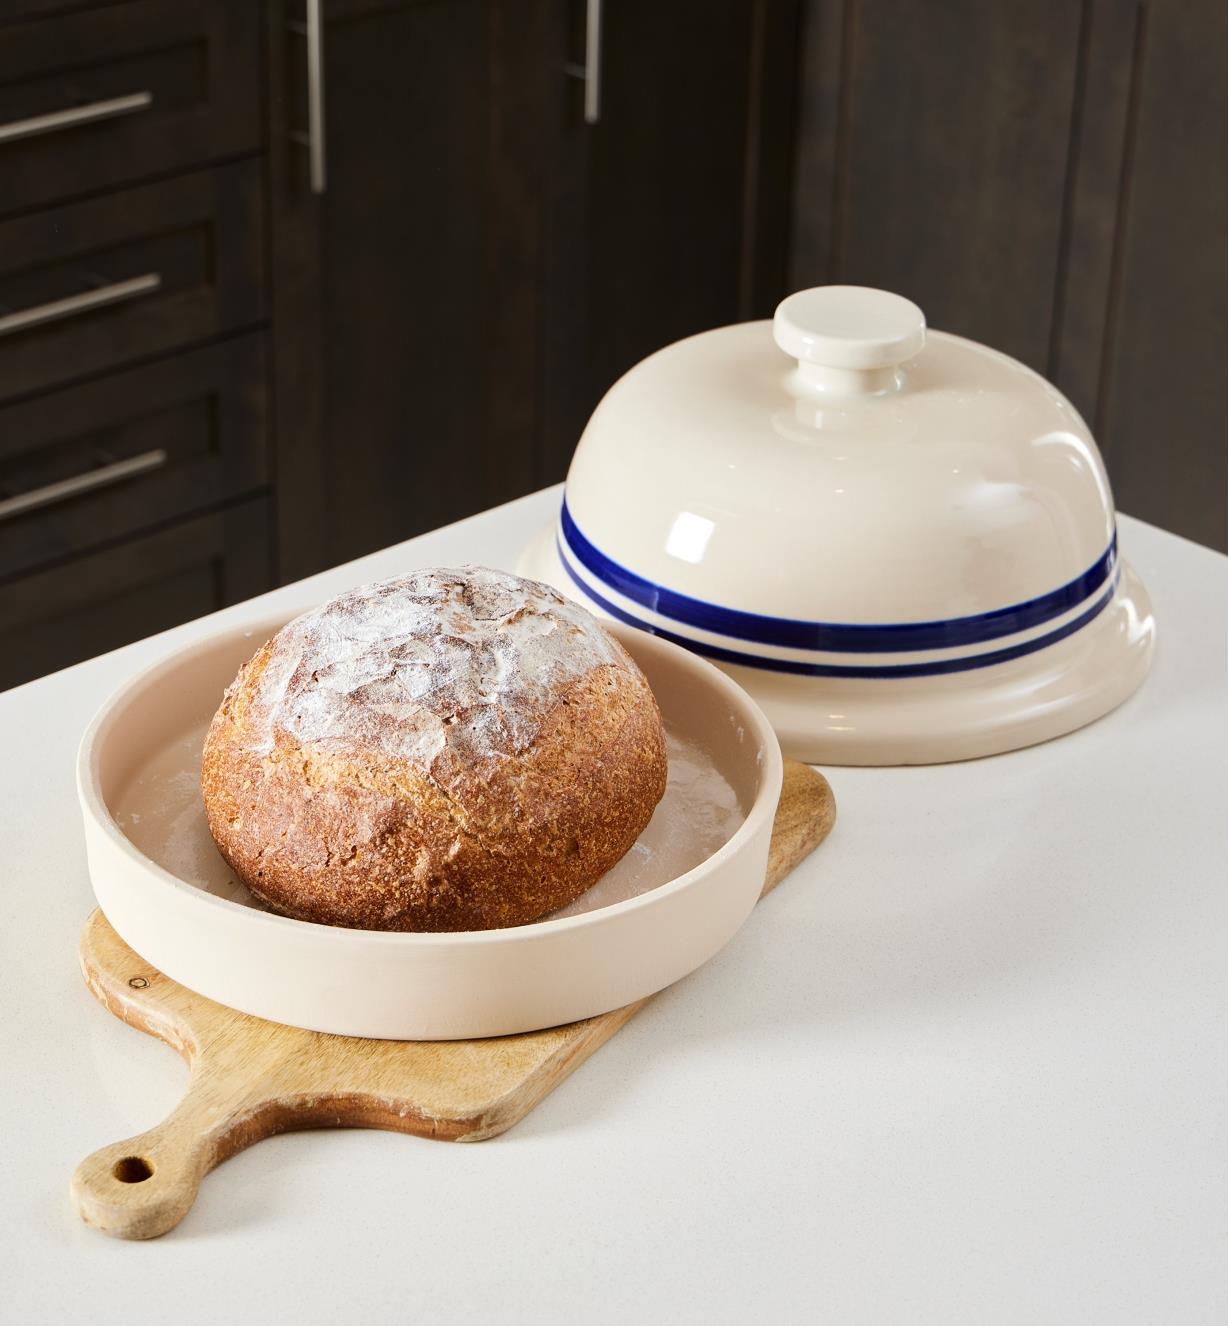 A baked sourdough loaf sits in the base of the bread-baking cloche